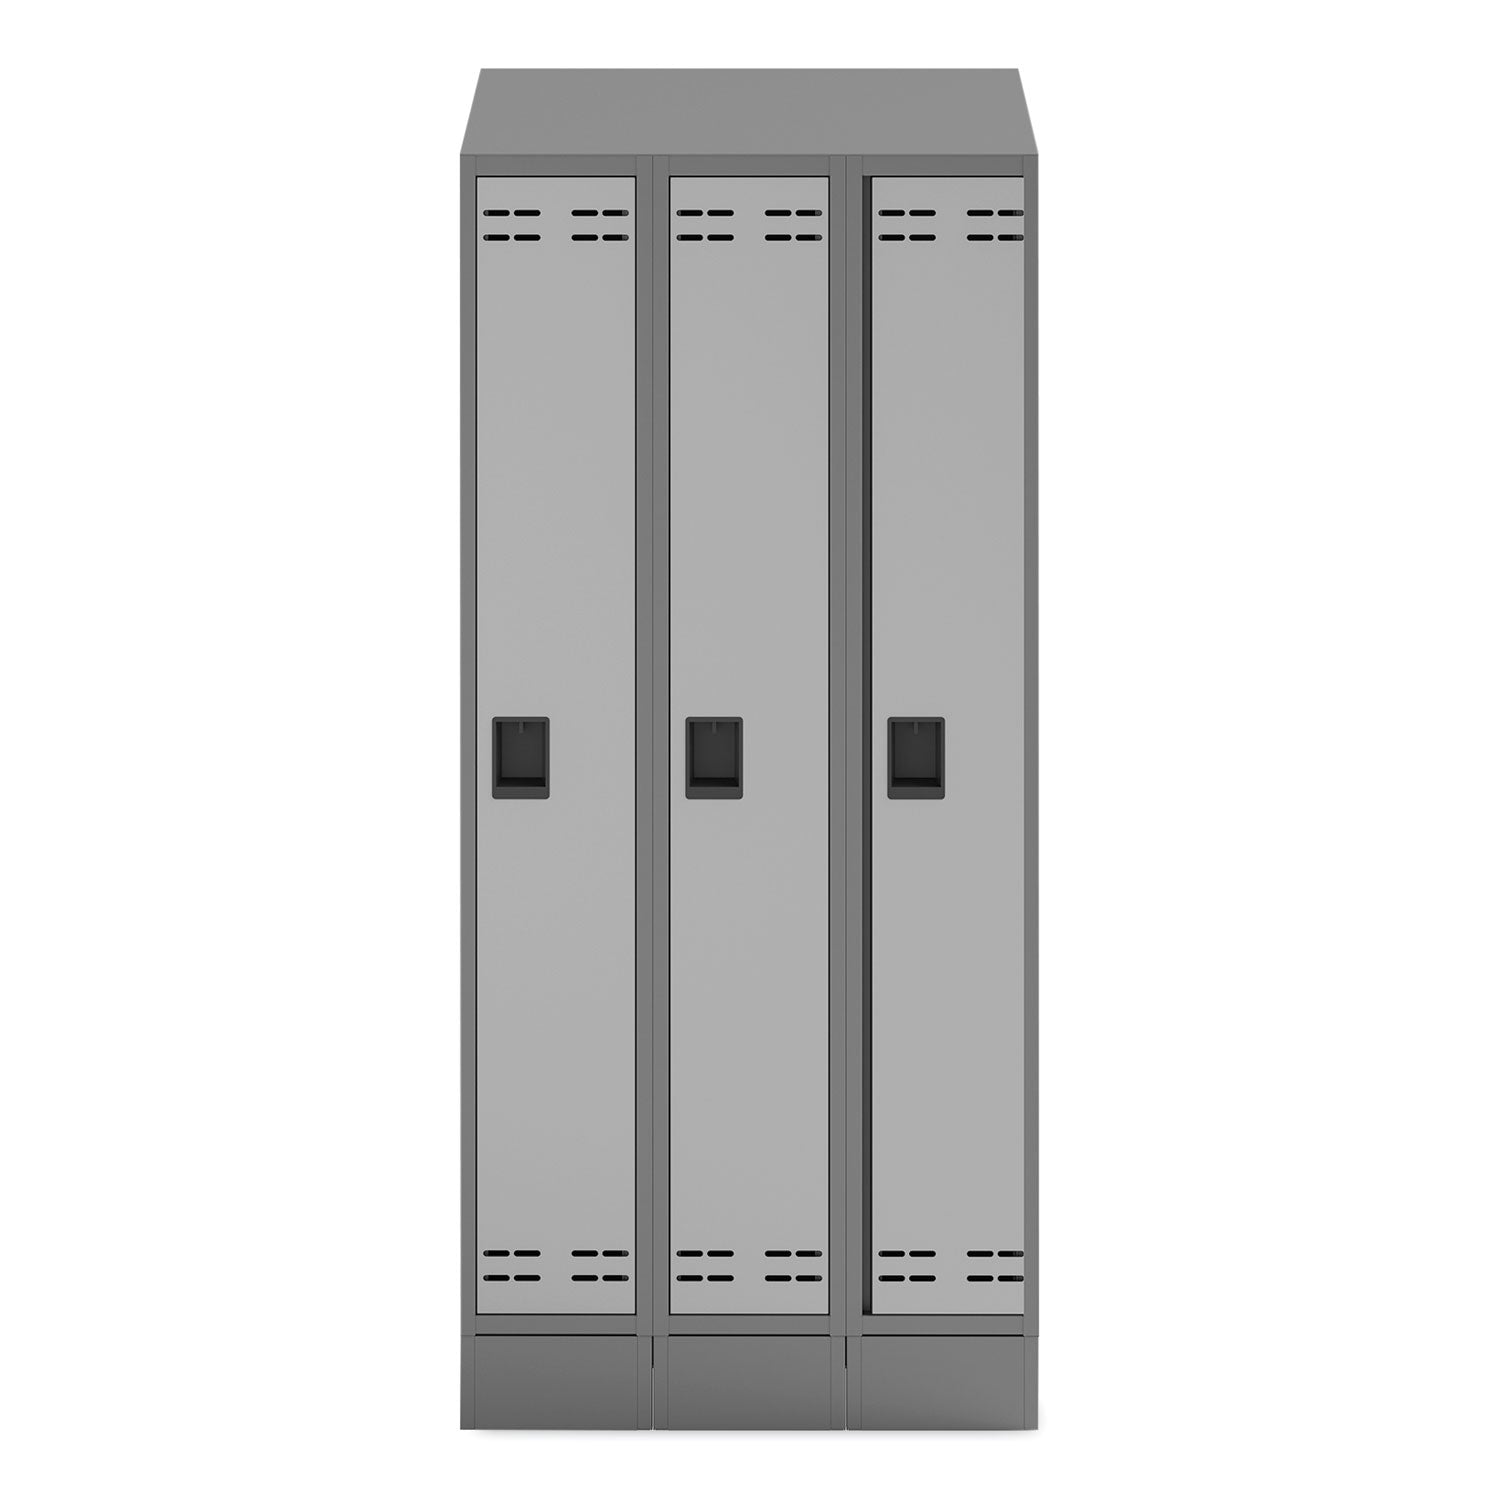 triple-continuous-metal-locker-base-addition-35w-x-16d-x-575h-gray-ships-in-1-3-business-days_saf5520gr - 2